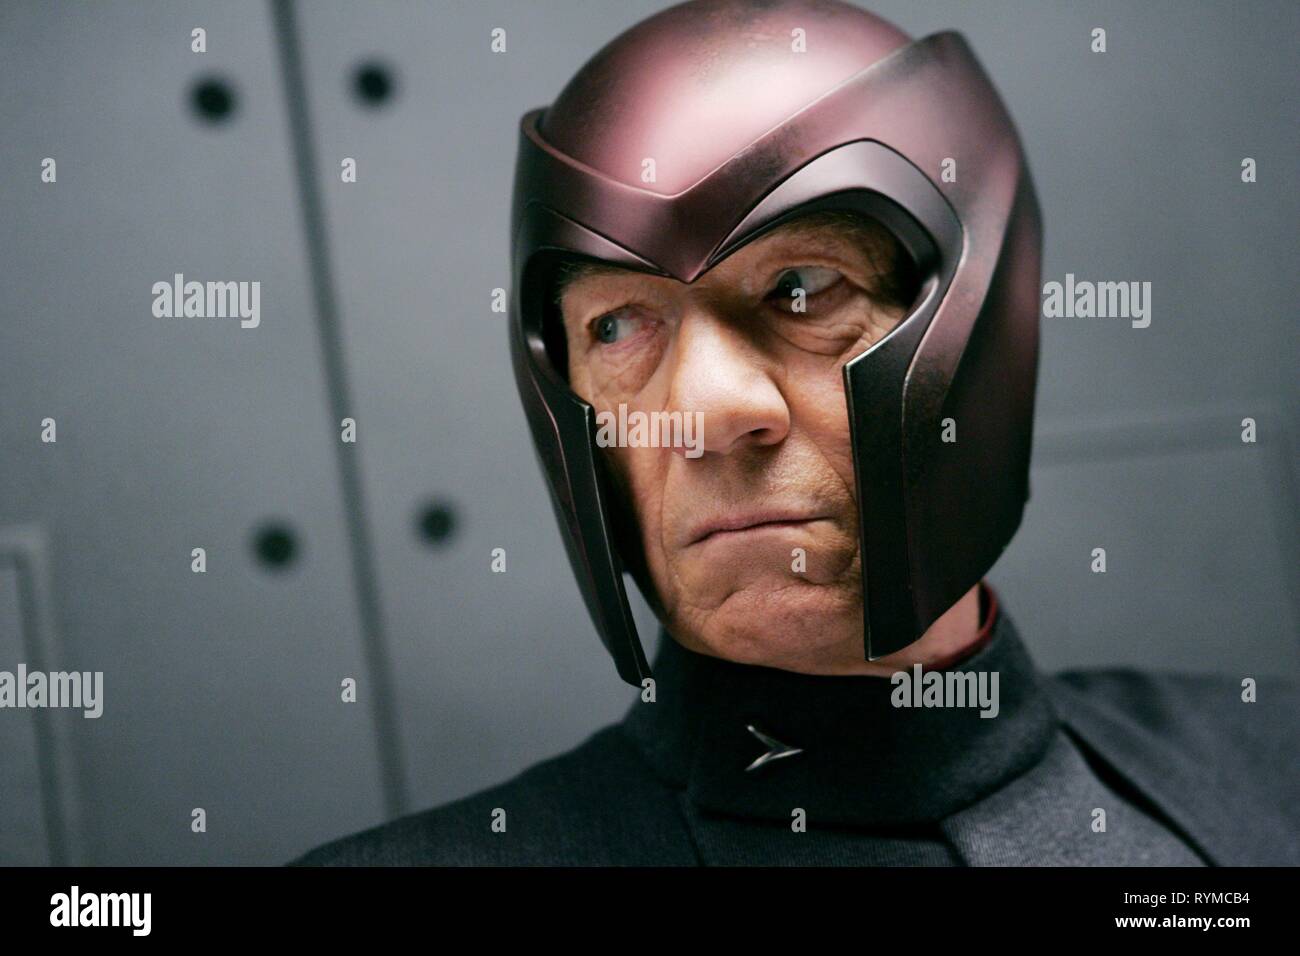 X Men The Last Stand X Men 3 High Resolution Stock Photography And Images Alamy